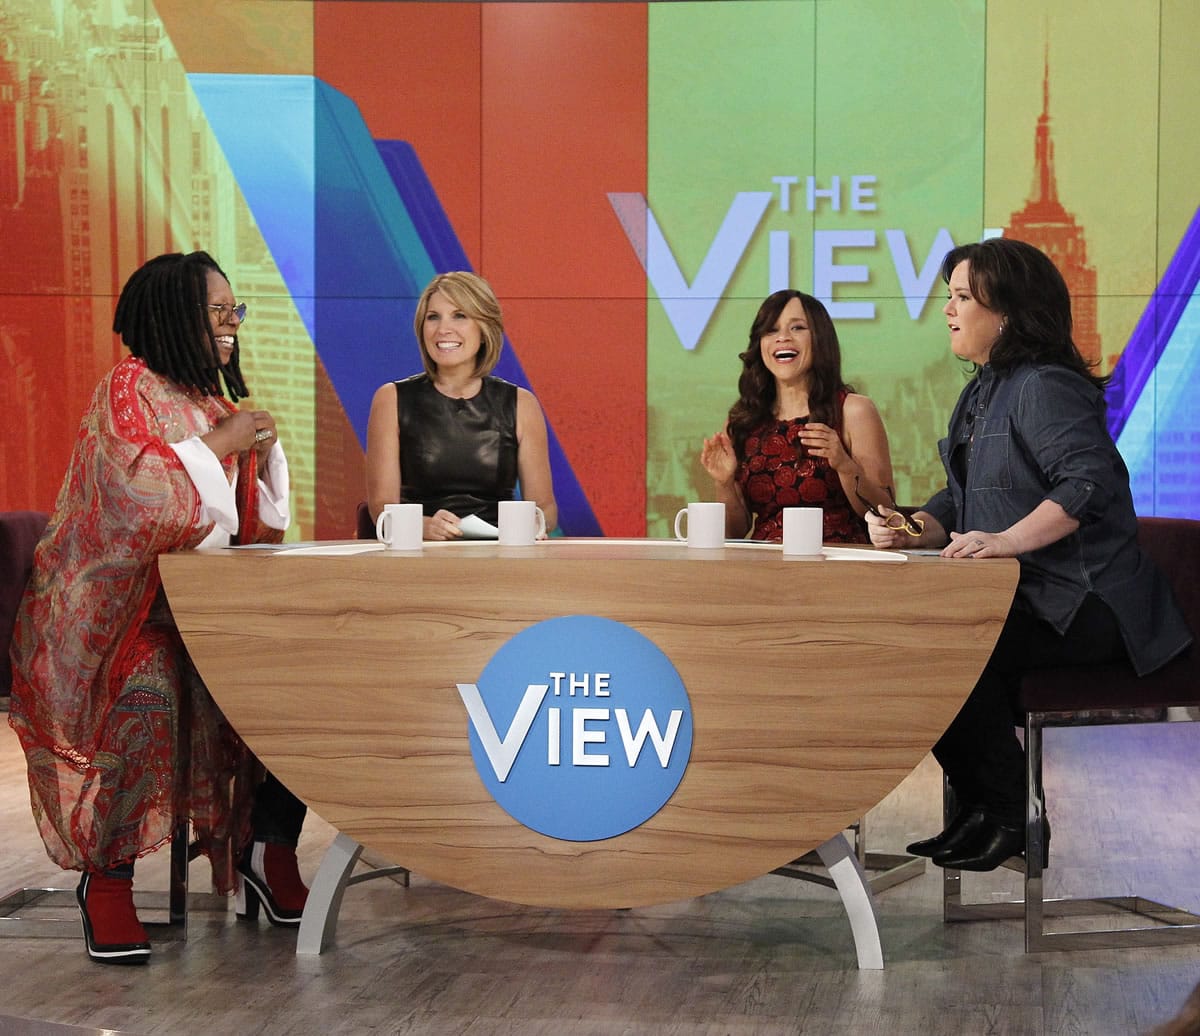 Co-hosts Whoopi Goldberg, from left, Nicolle Wallace, Rosie Perez and Rosie O'Donnell appear on the set of the daytime talk show &quot;The View,&quot; in New York.